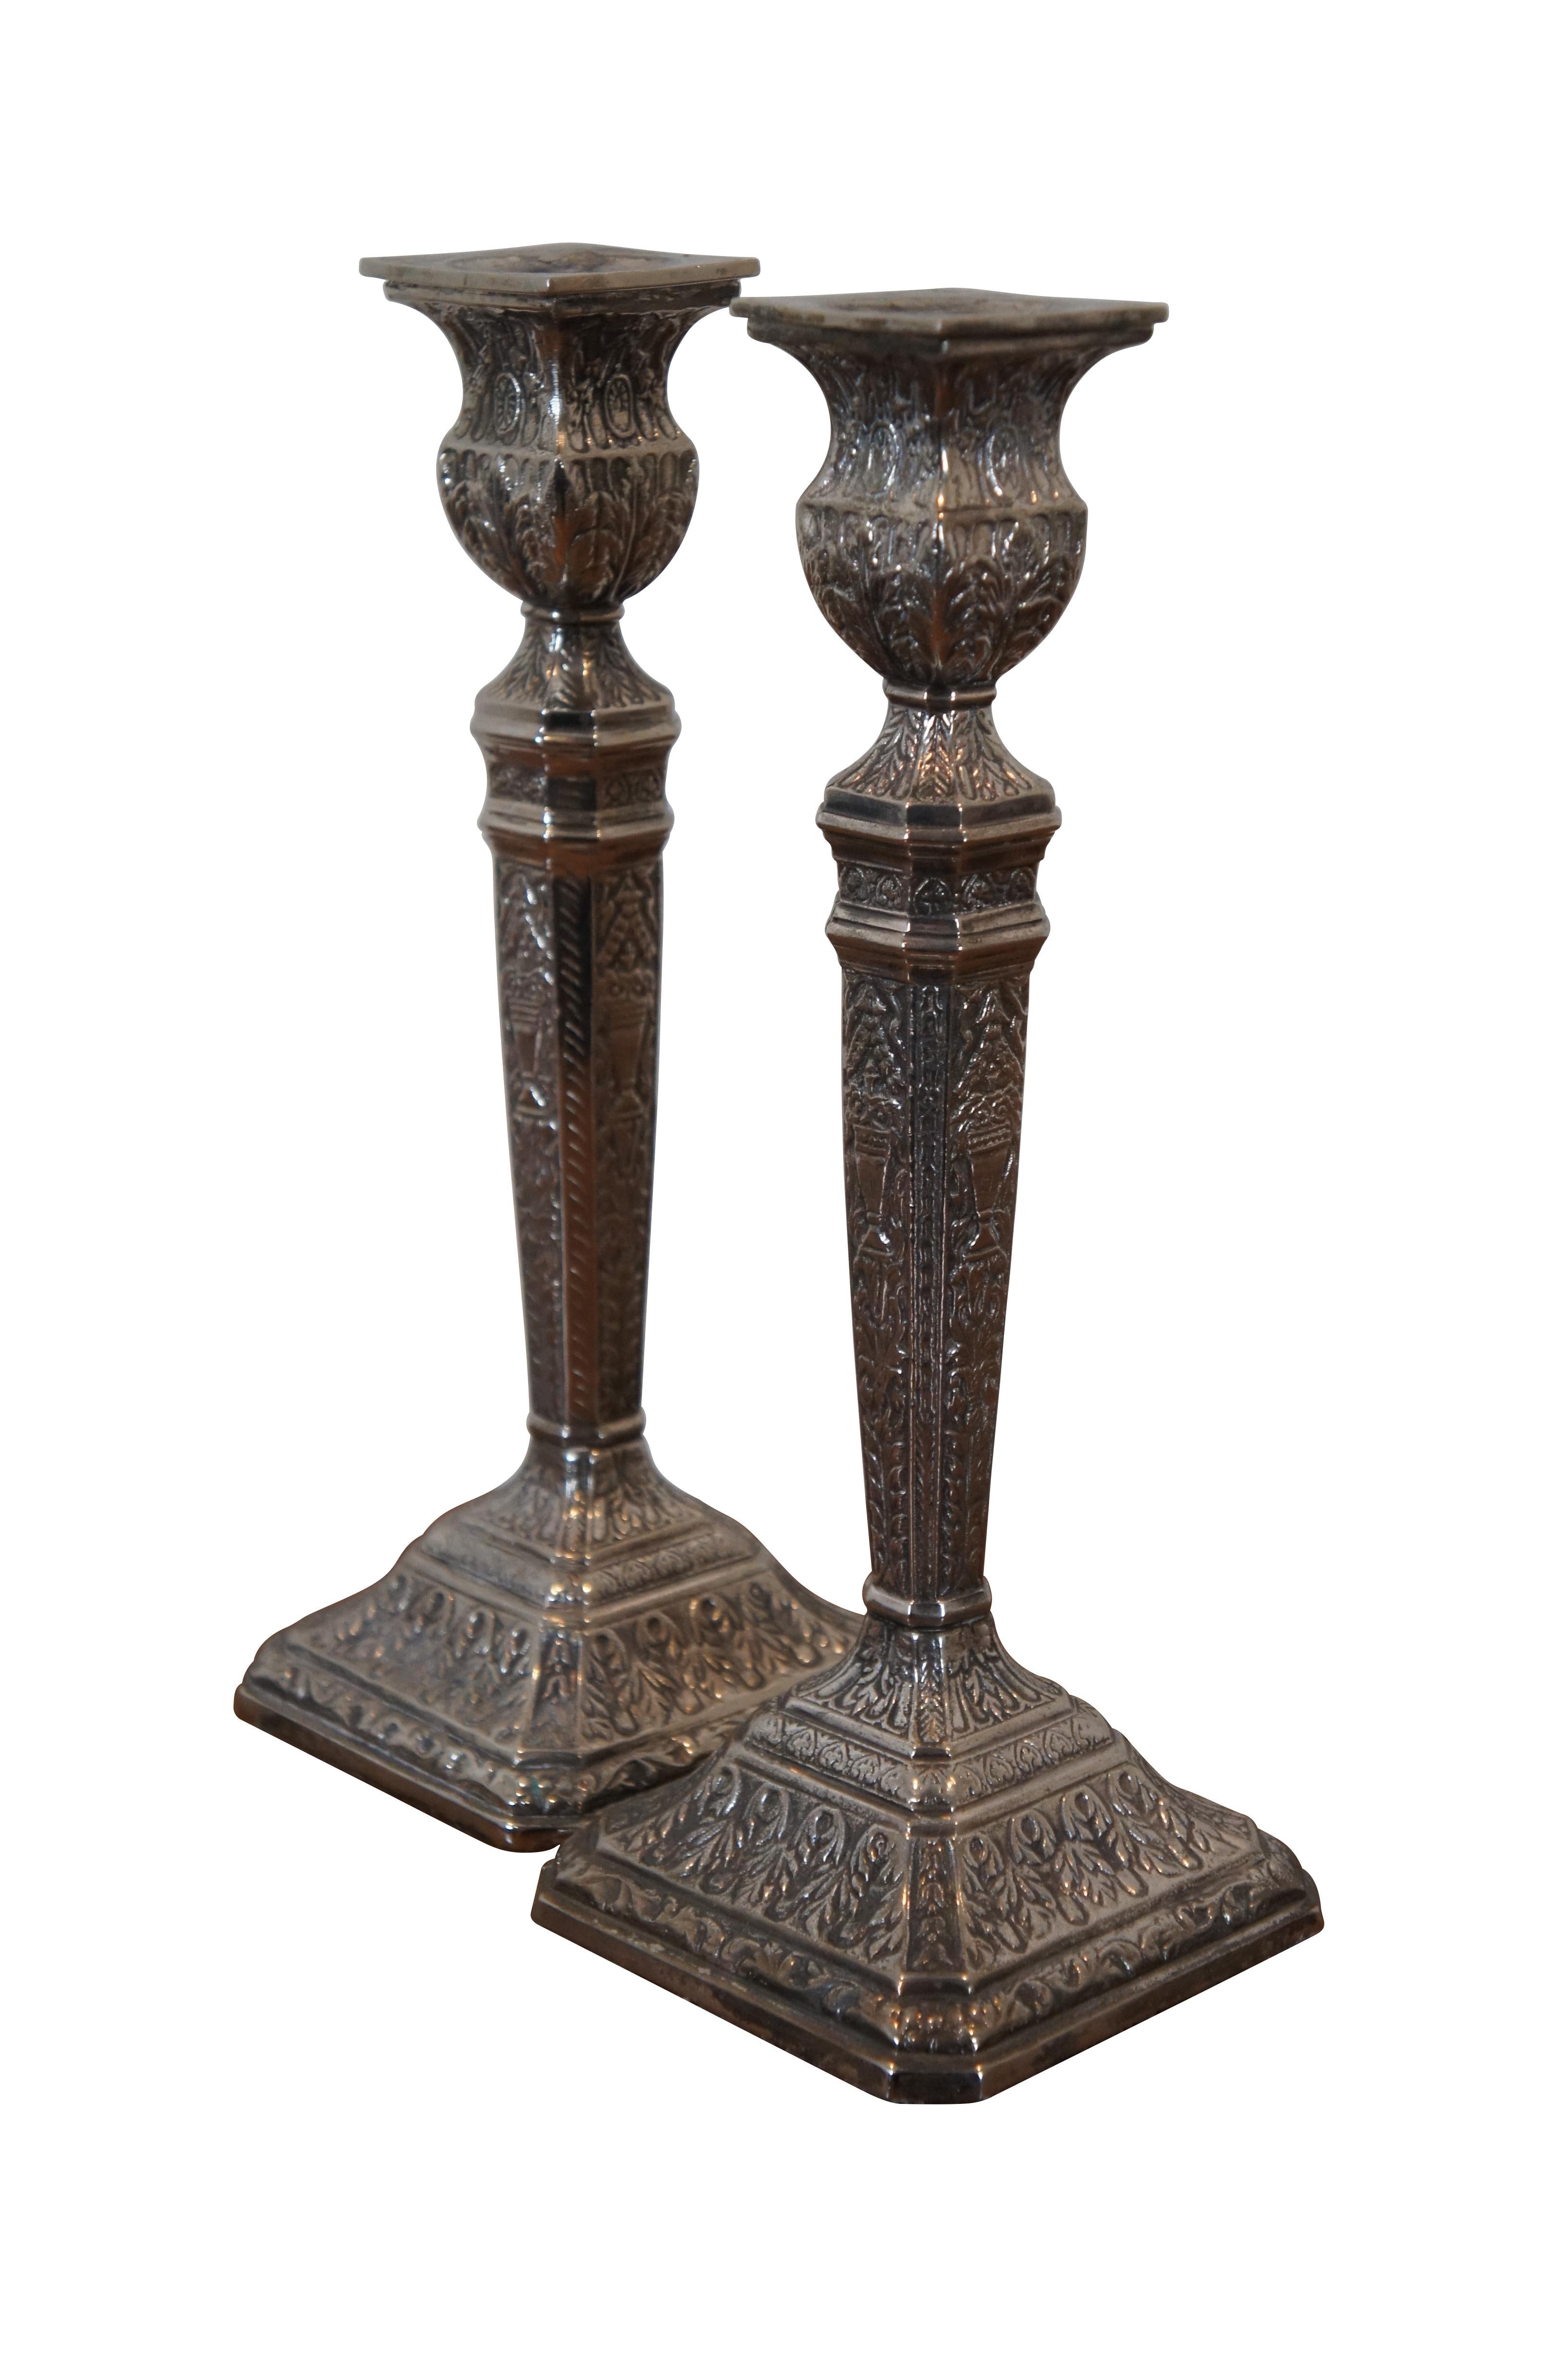 Pair of heavy, antique Georgian style repousse silver plate candlesticks / taper candle holders. Square cut corner base and tapered column with planter-urn shaped top, ornately decorated with swags of foliage, flowers and Neoclassical vases. Bottom